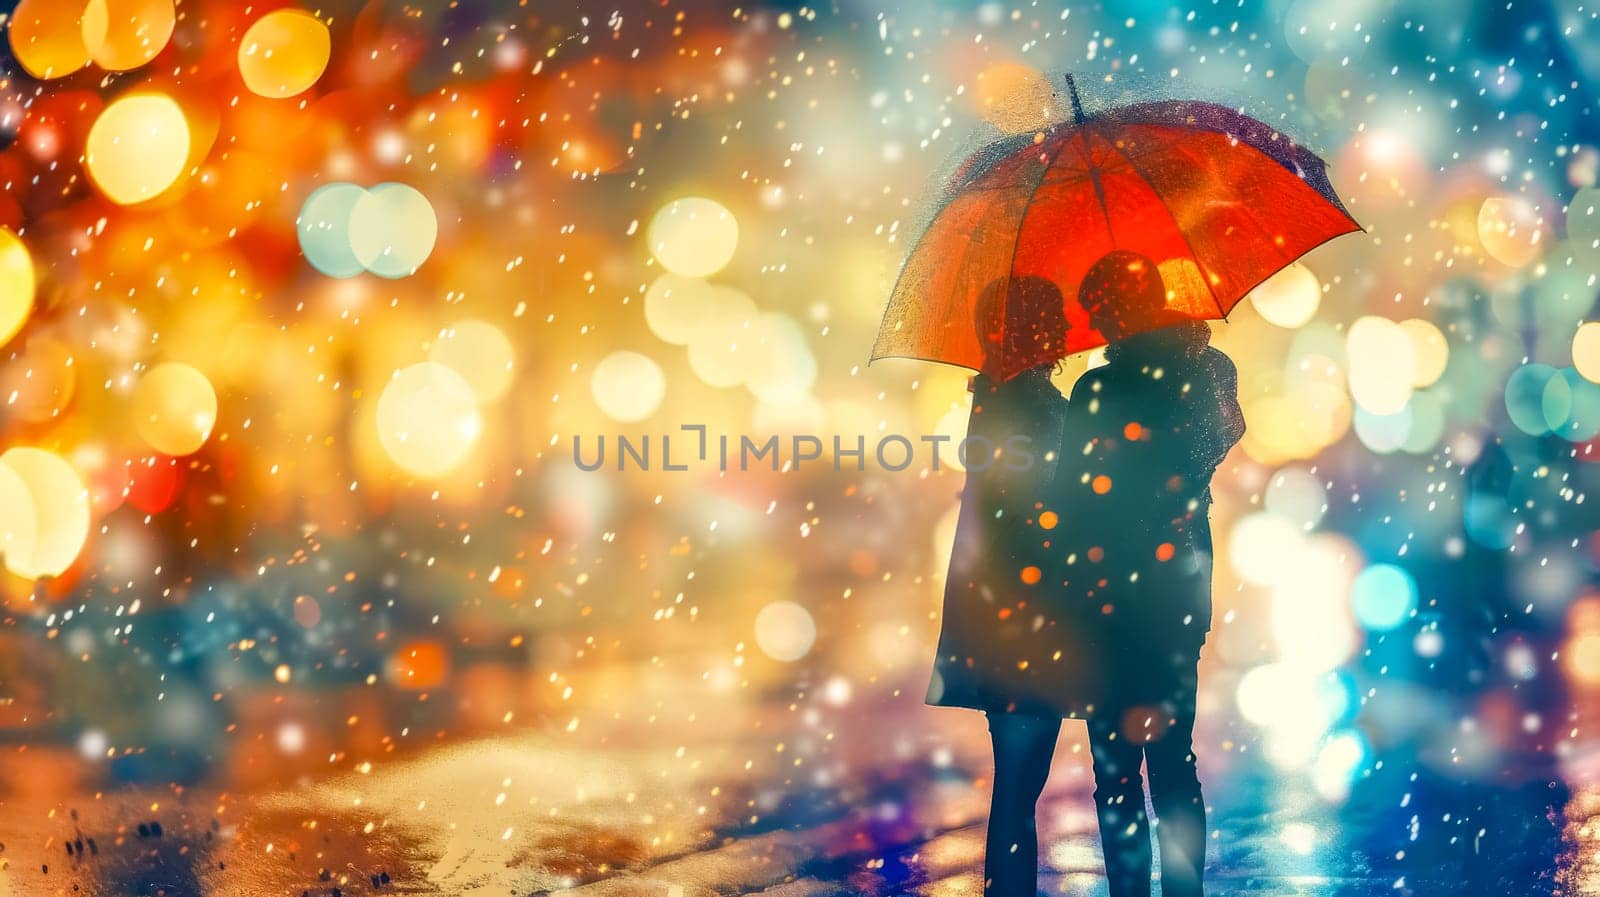 Silhouette of a person under a red umbrella amidst snowfall and festive city lights